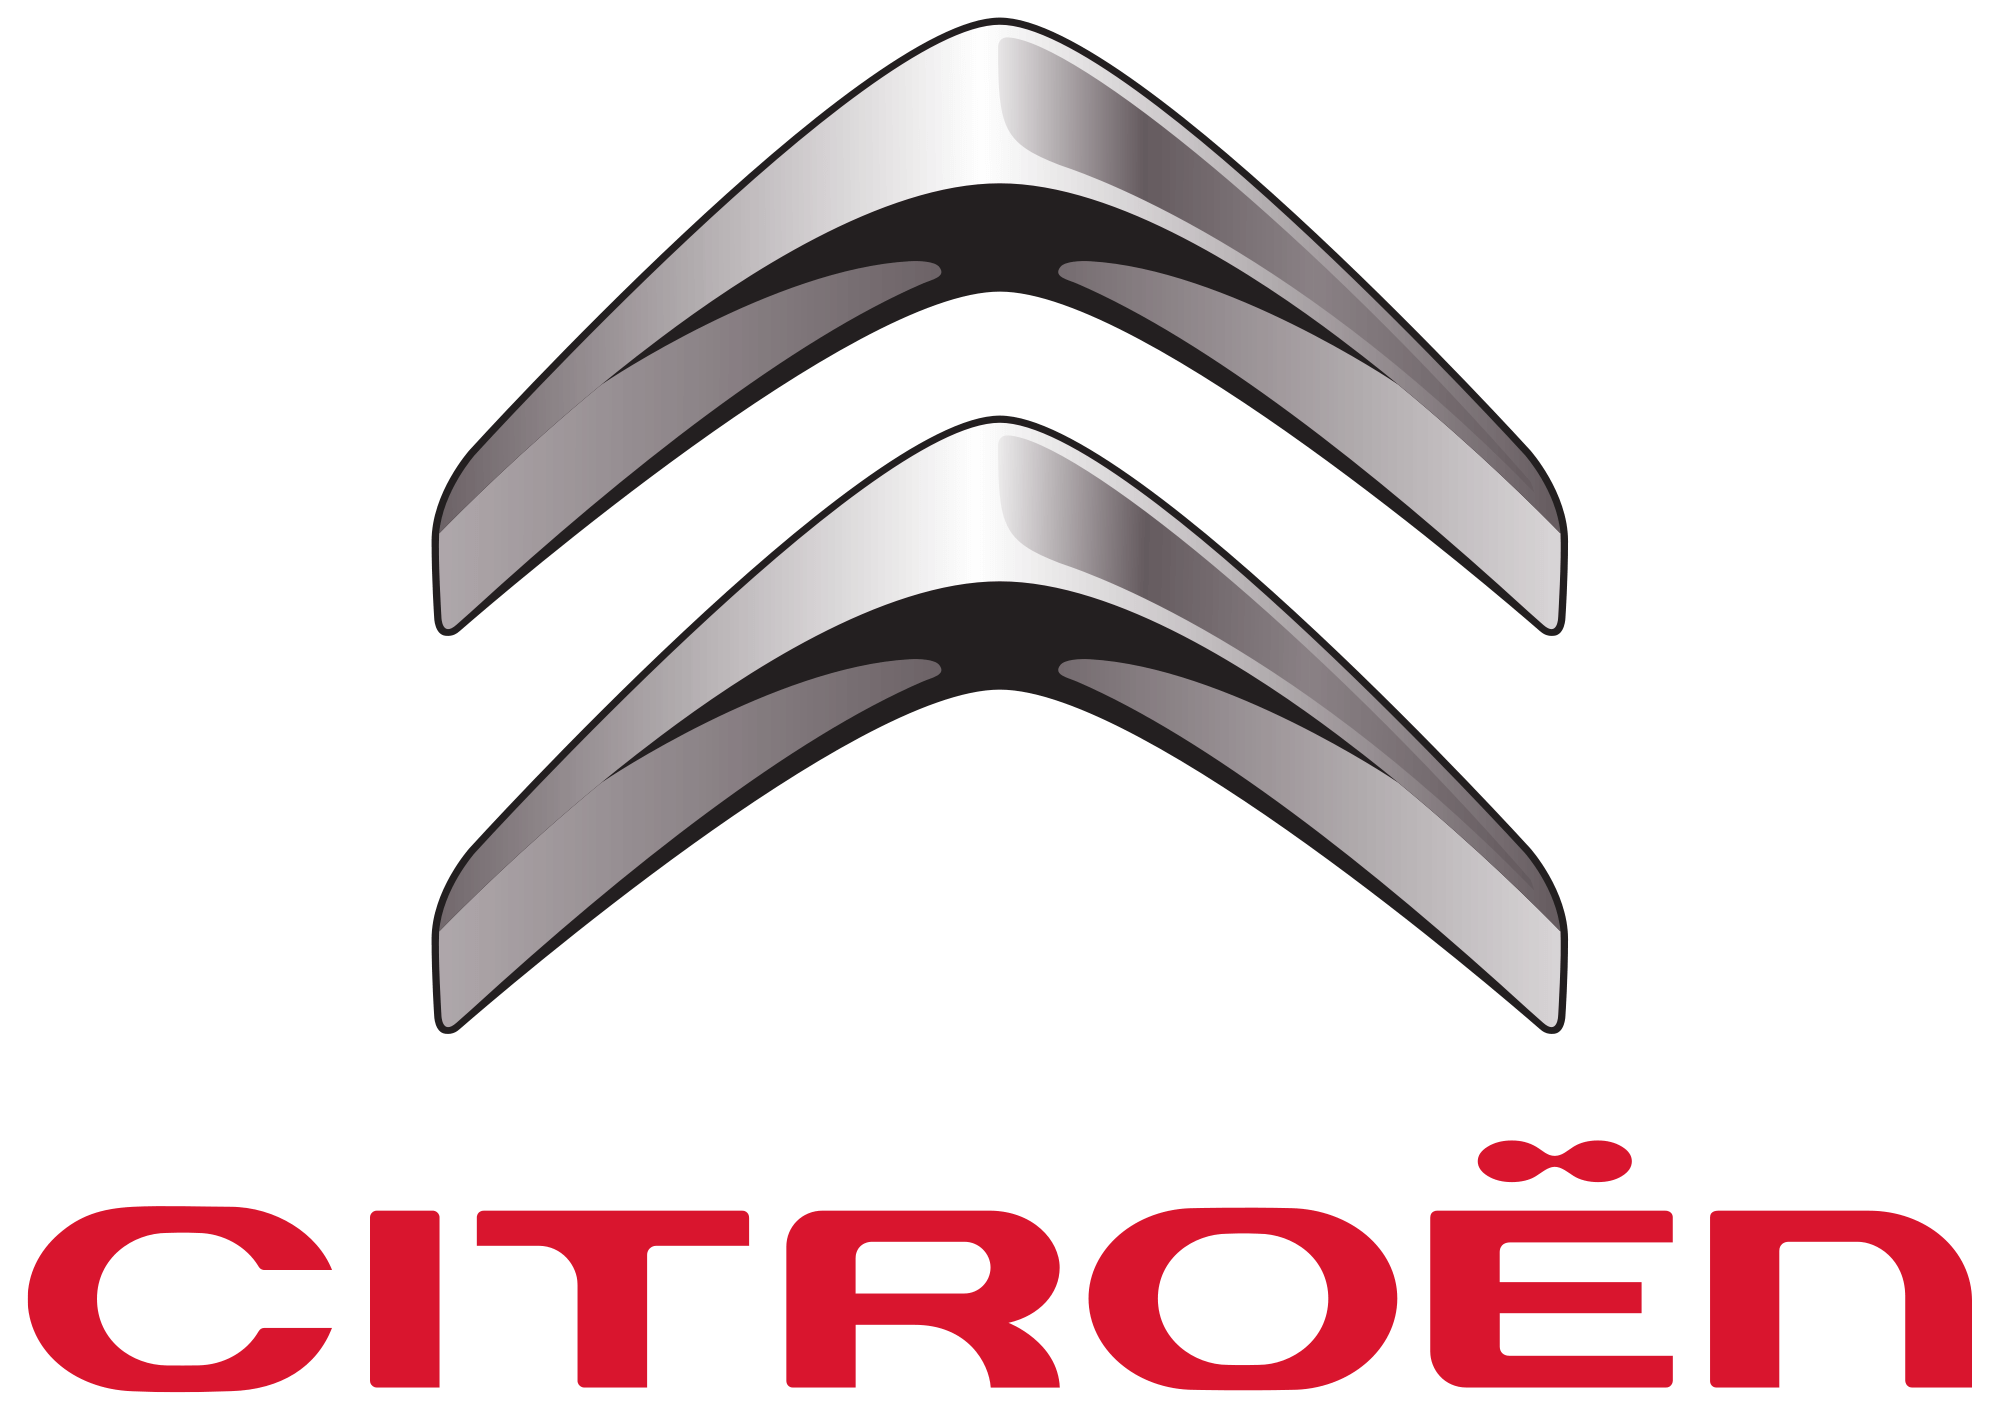 Used Citroëns at cartime Bury, Manchester